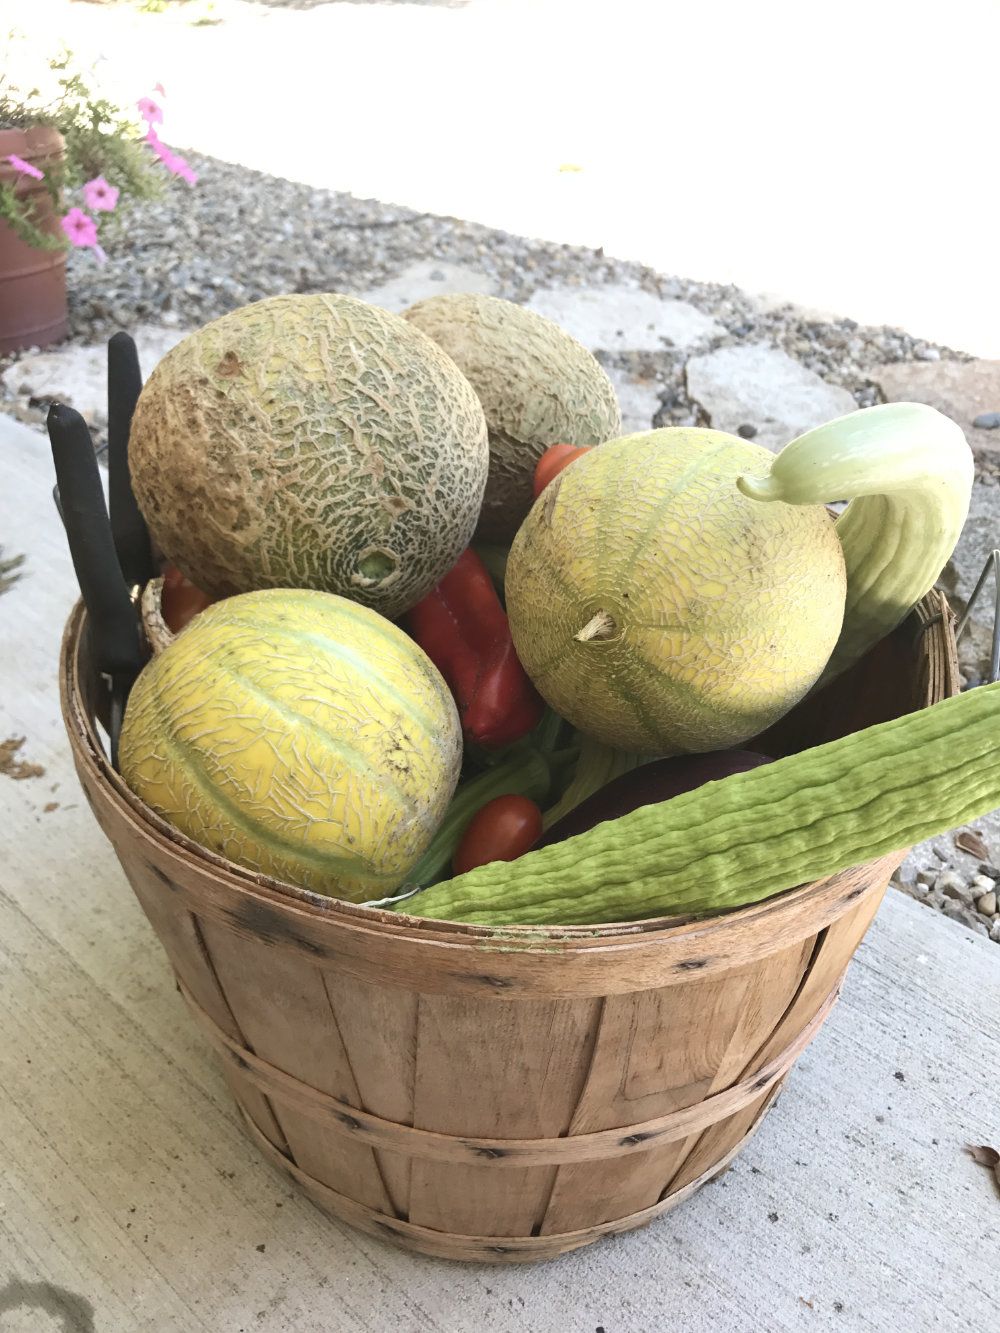 A basket filled with home grown melons, cucumbers, and tomatoes.